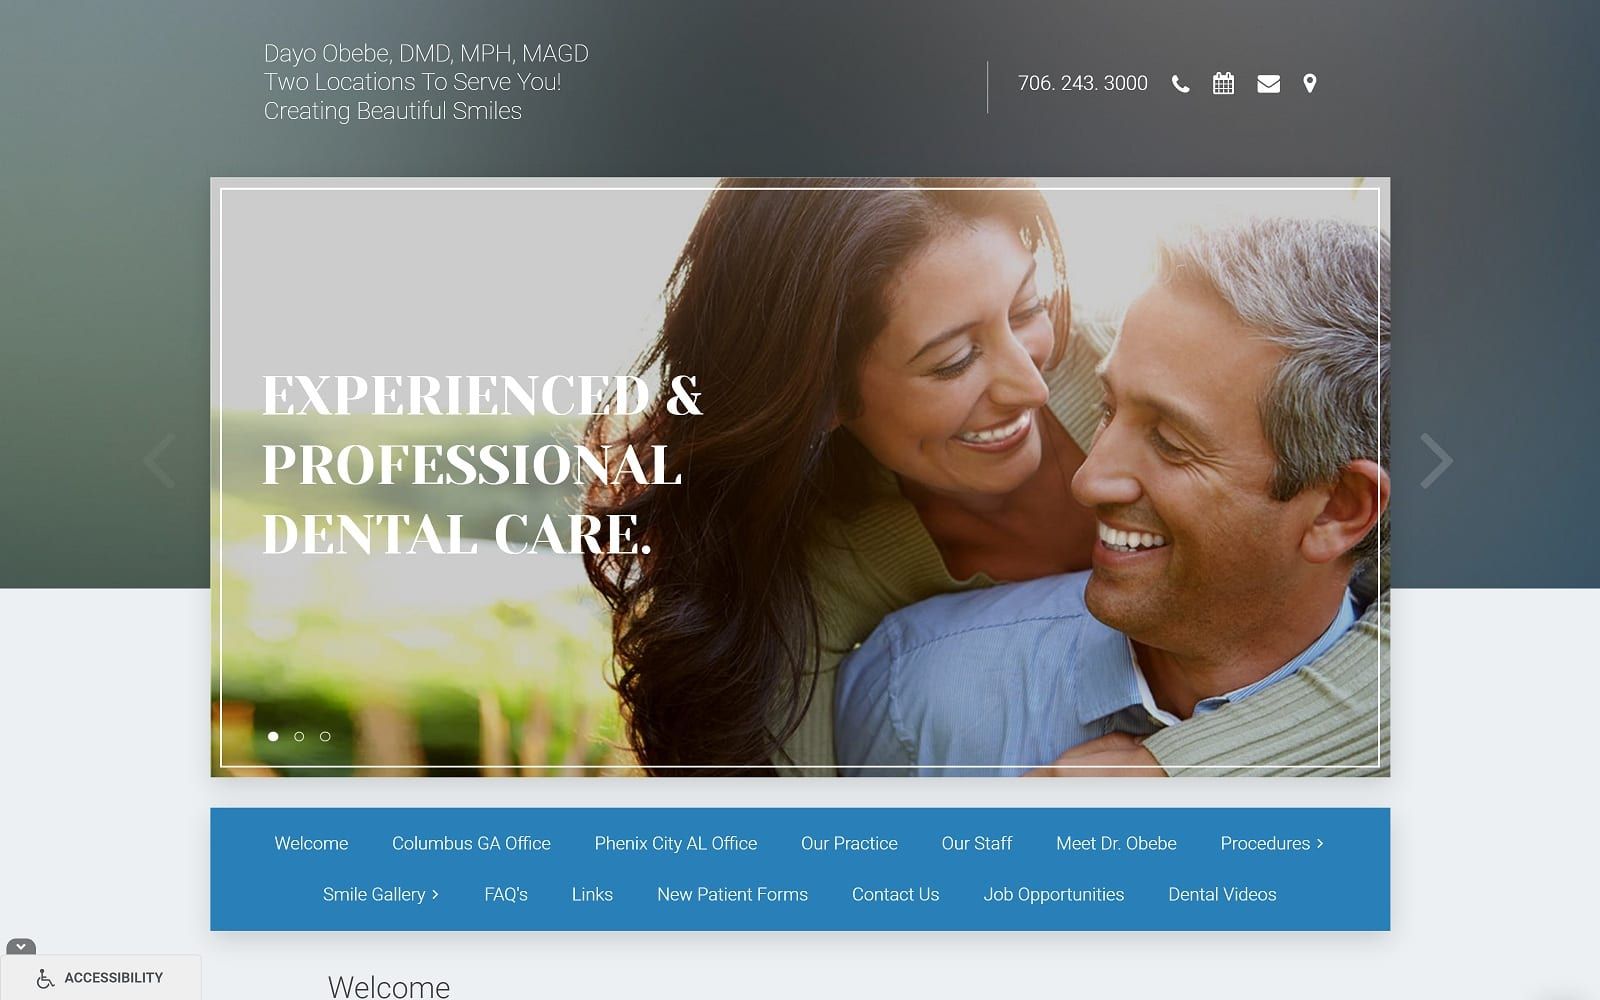 The screenshot of moon road cosmetic & family dentistry obebe. Com dr. Dayo obebe website